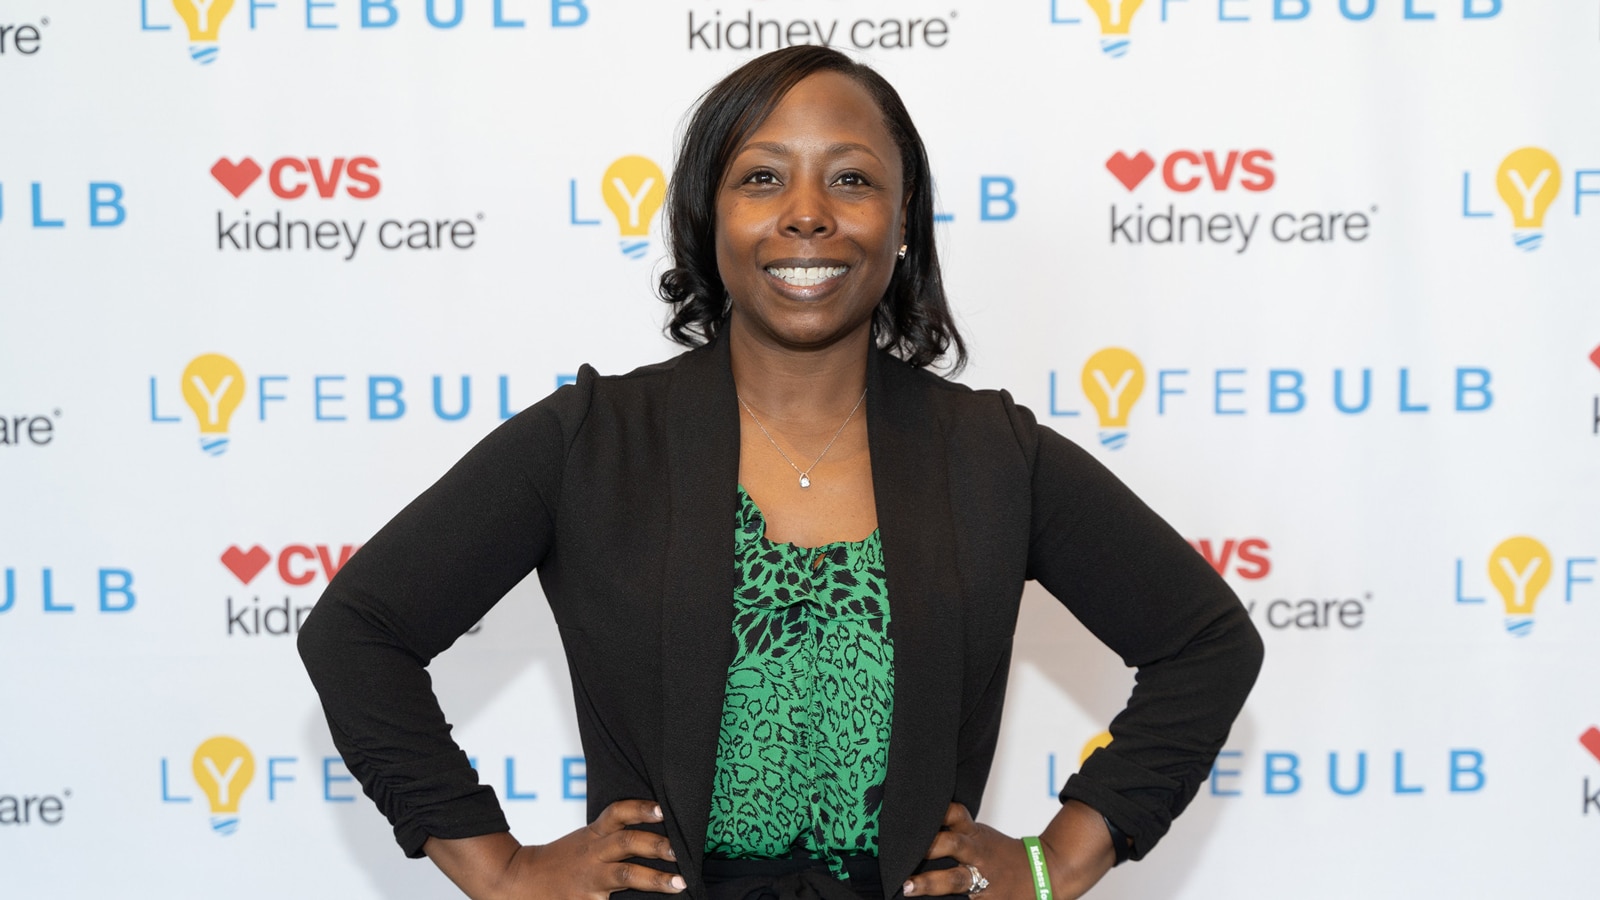 Sharron Rouse smiles in front of a display with the CVS Kidney Care and Lyfebulb logos.